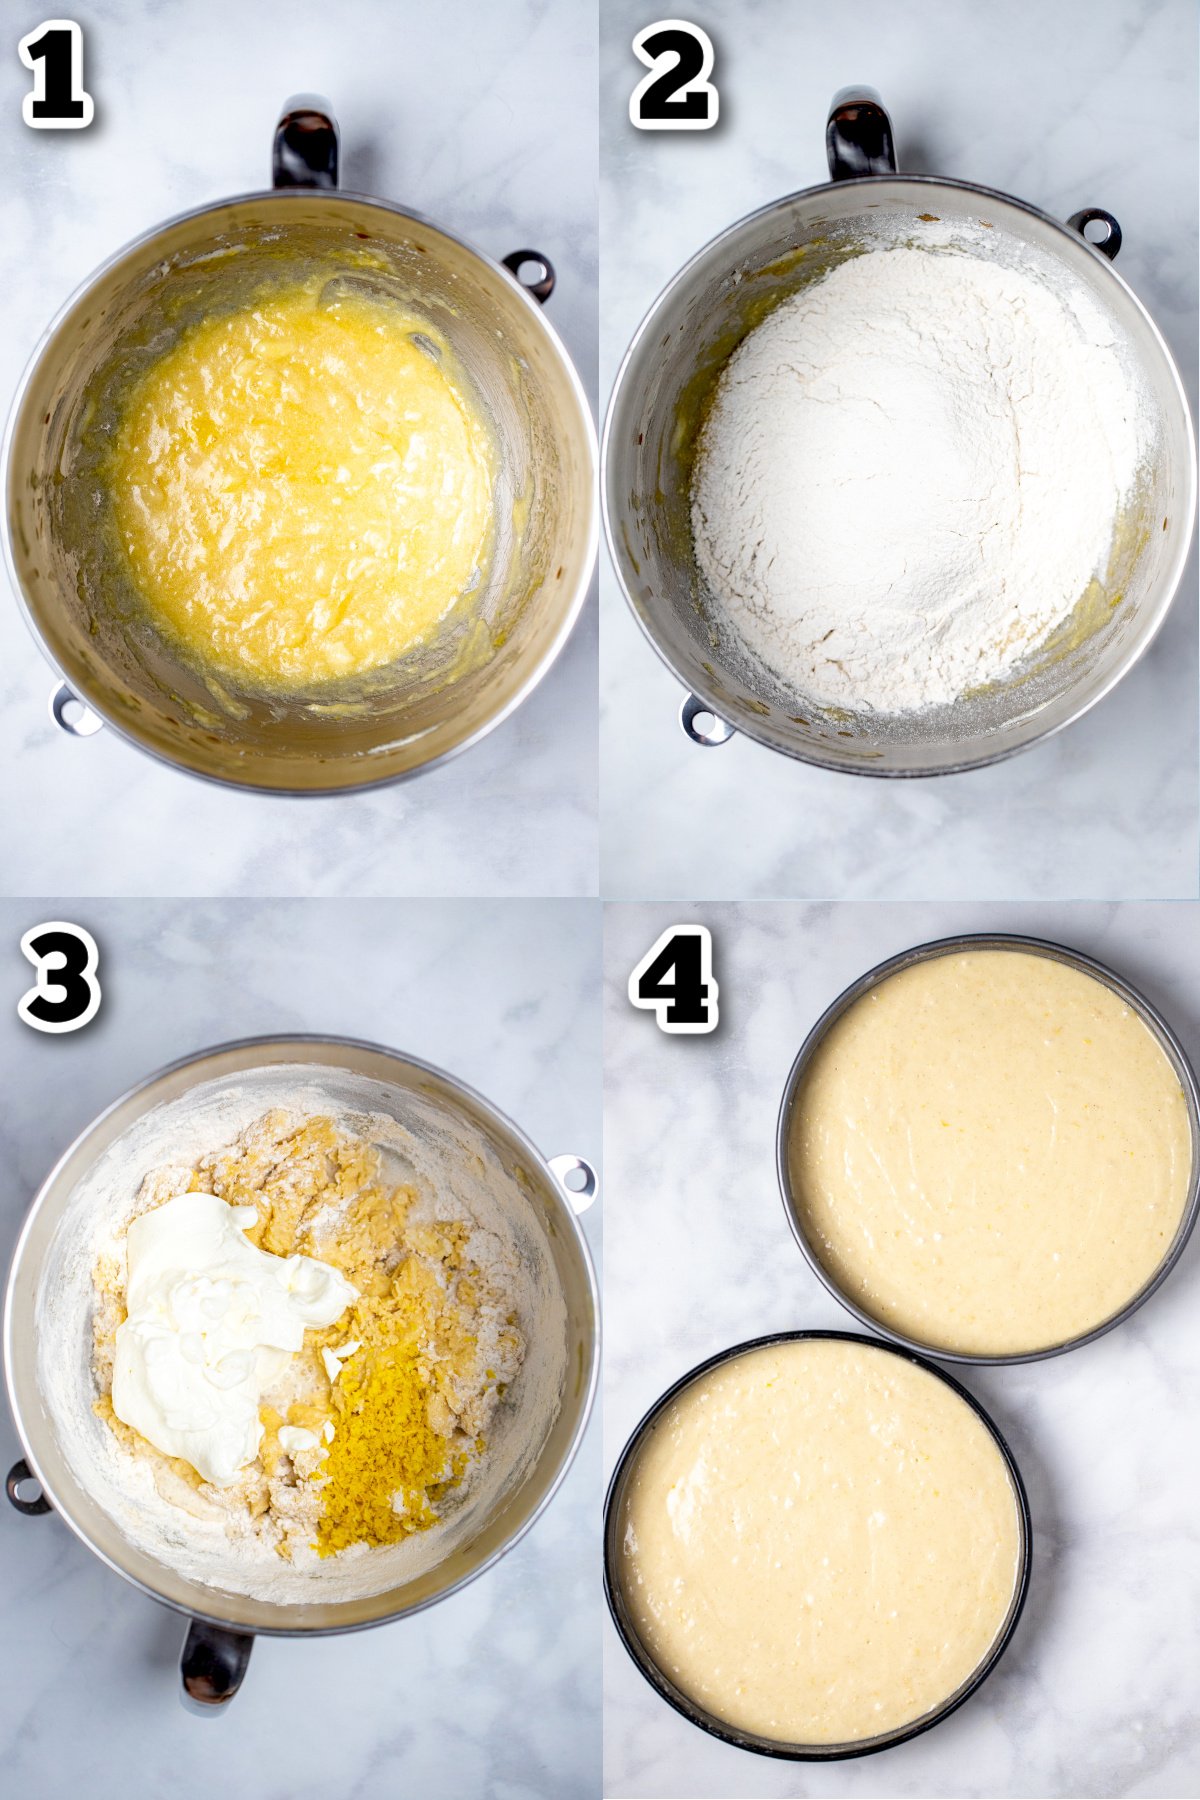 Step by step photos for how to make gluten free lemon cake.